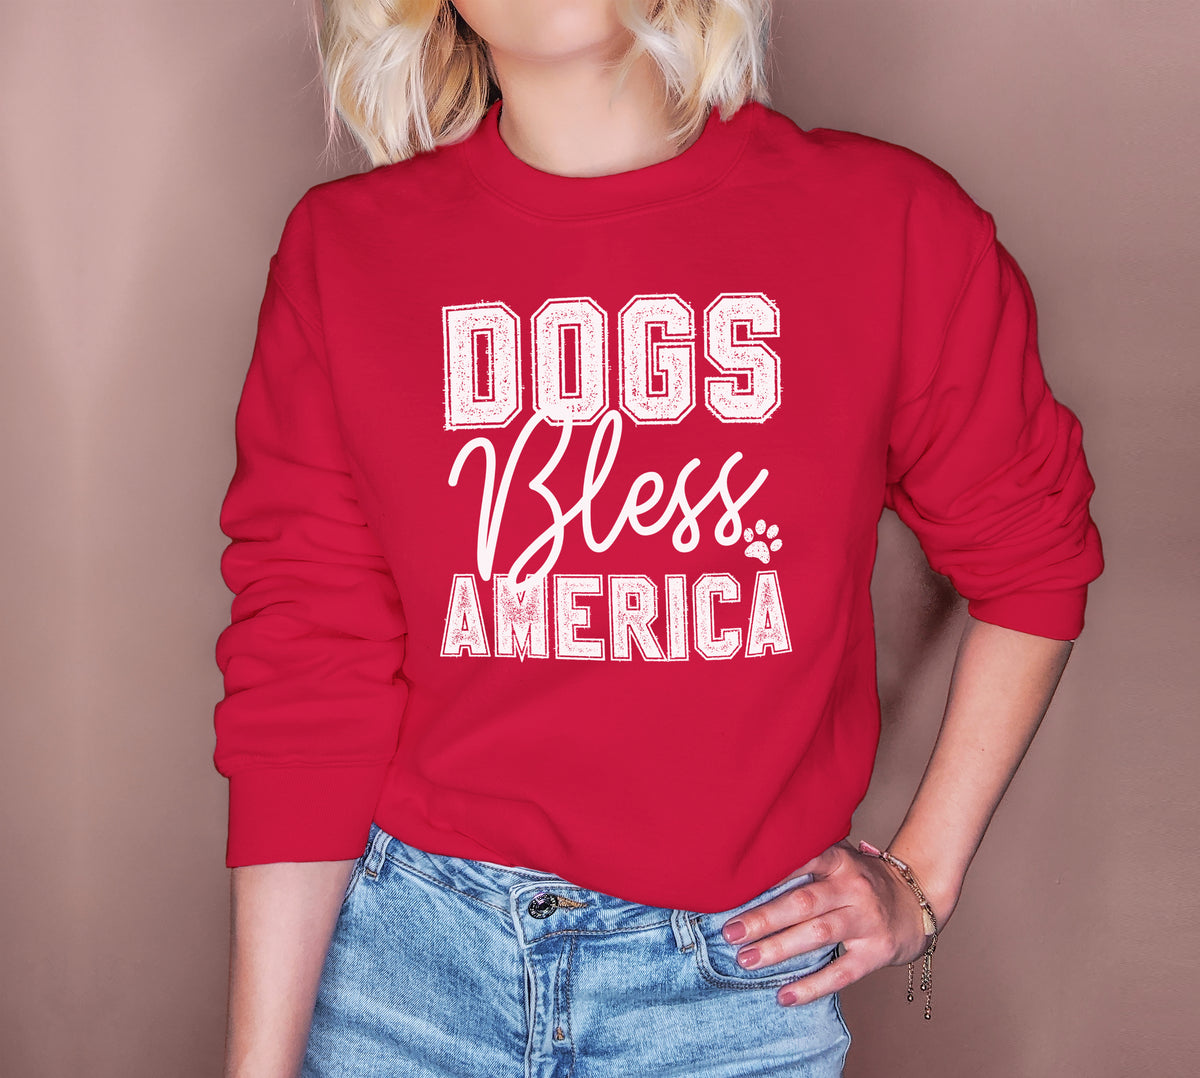 Red sweatshirt that says dogs bless america - HighCiti